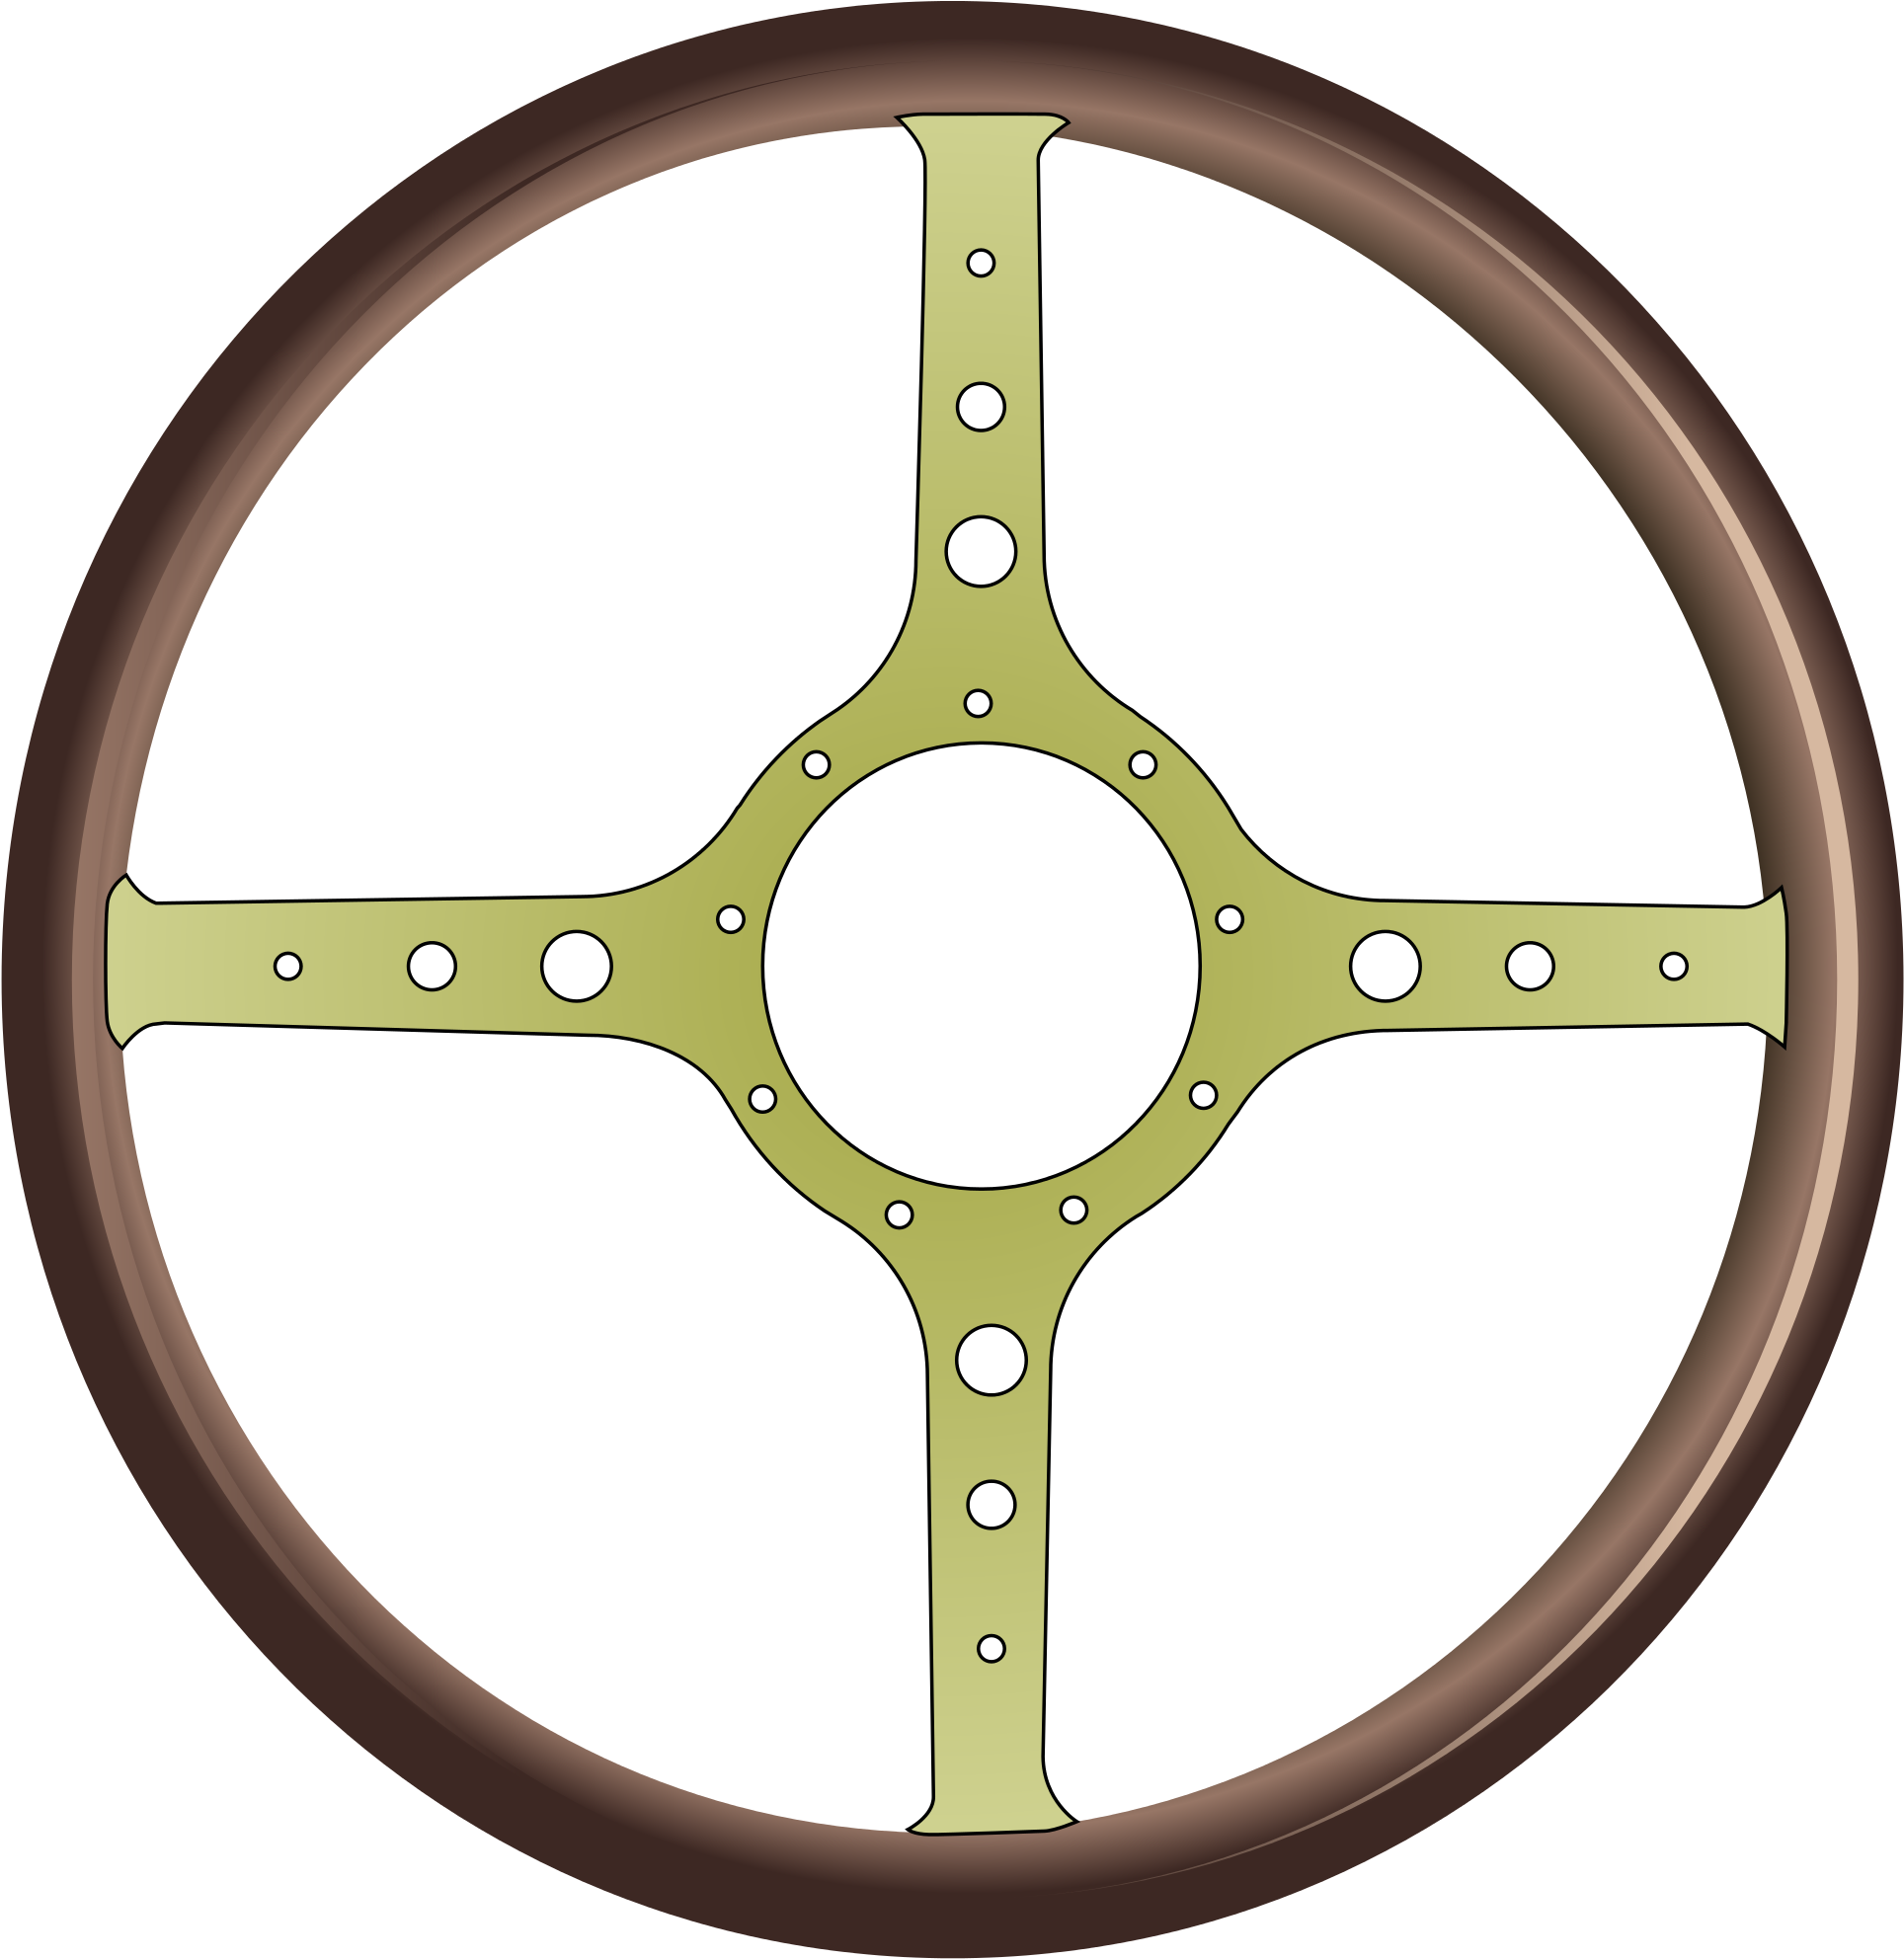 A Steering Wheel With A Circular Metal Frame